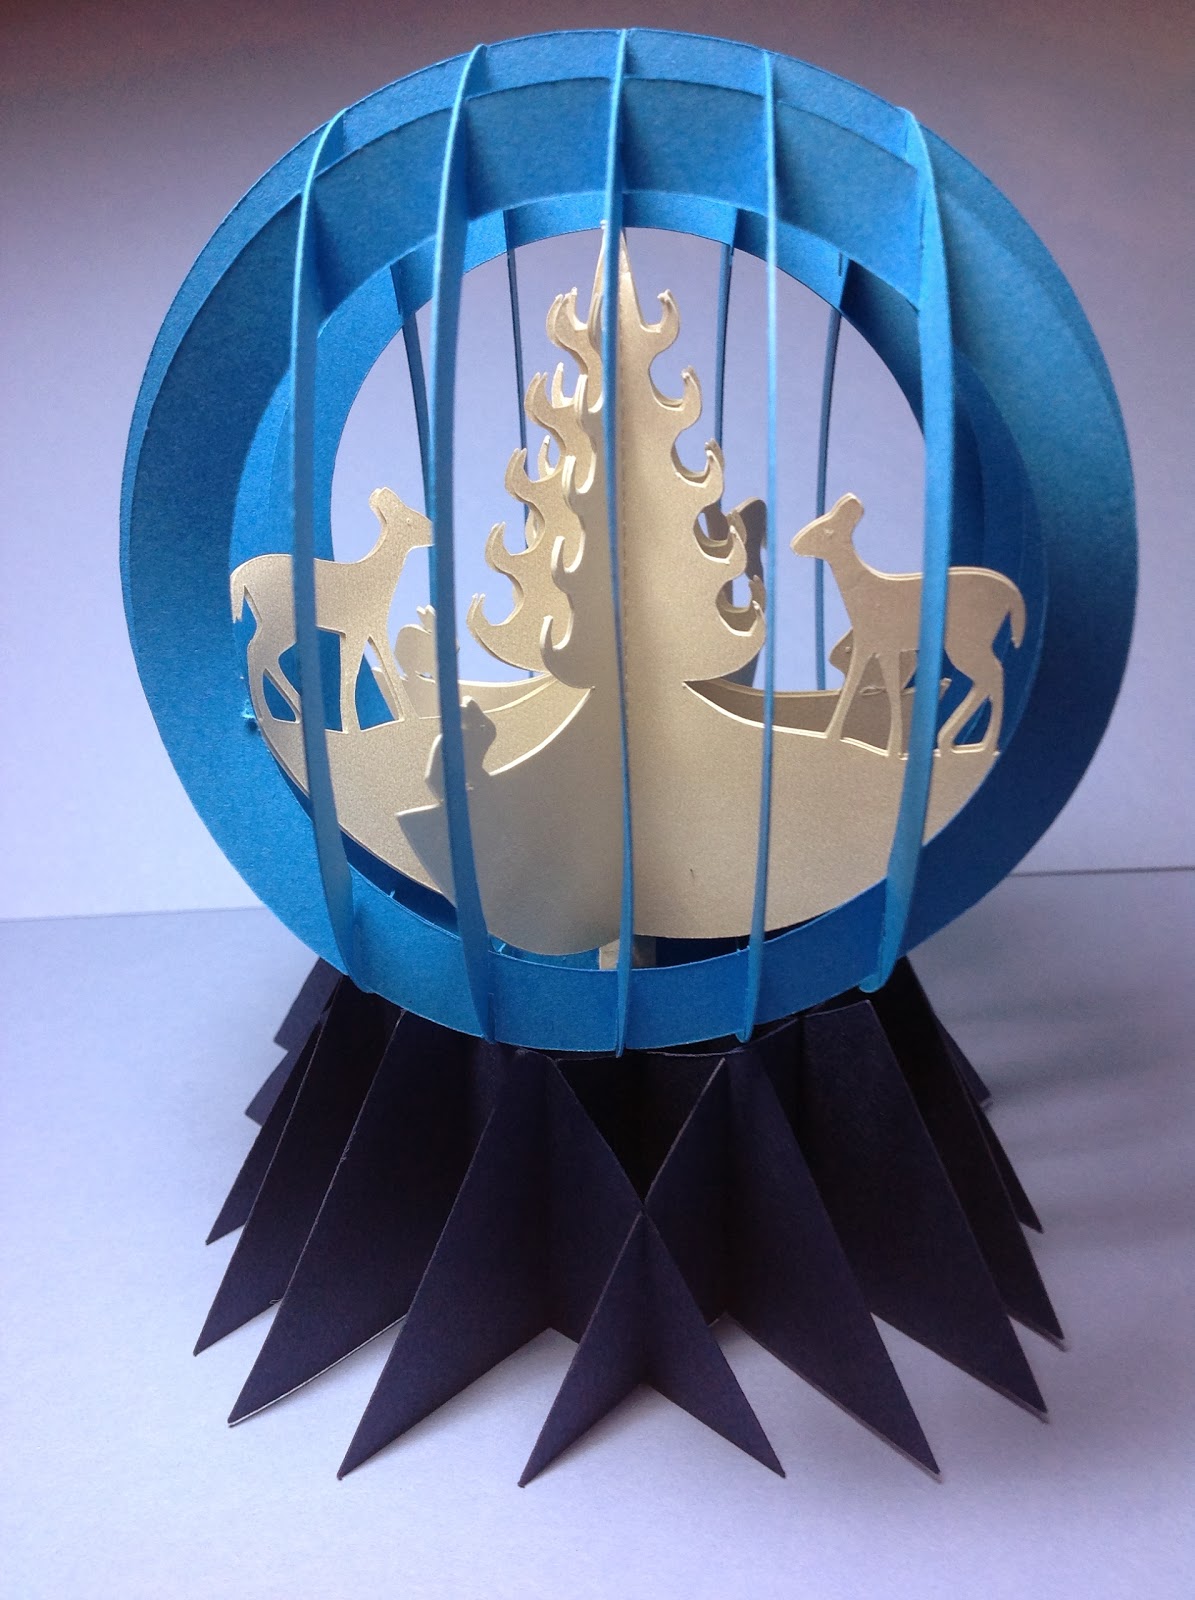 papercrafts-and-other-fun-things-paper-snow-globe-sliceform-for